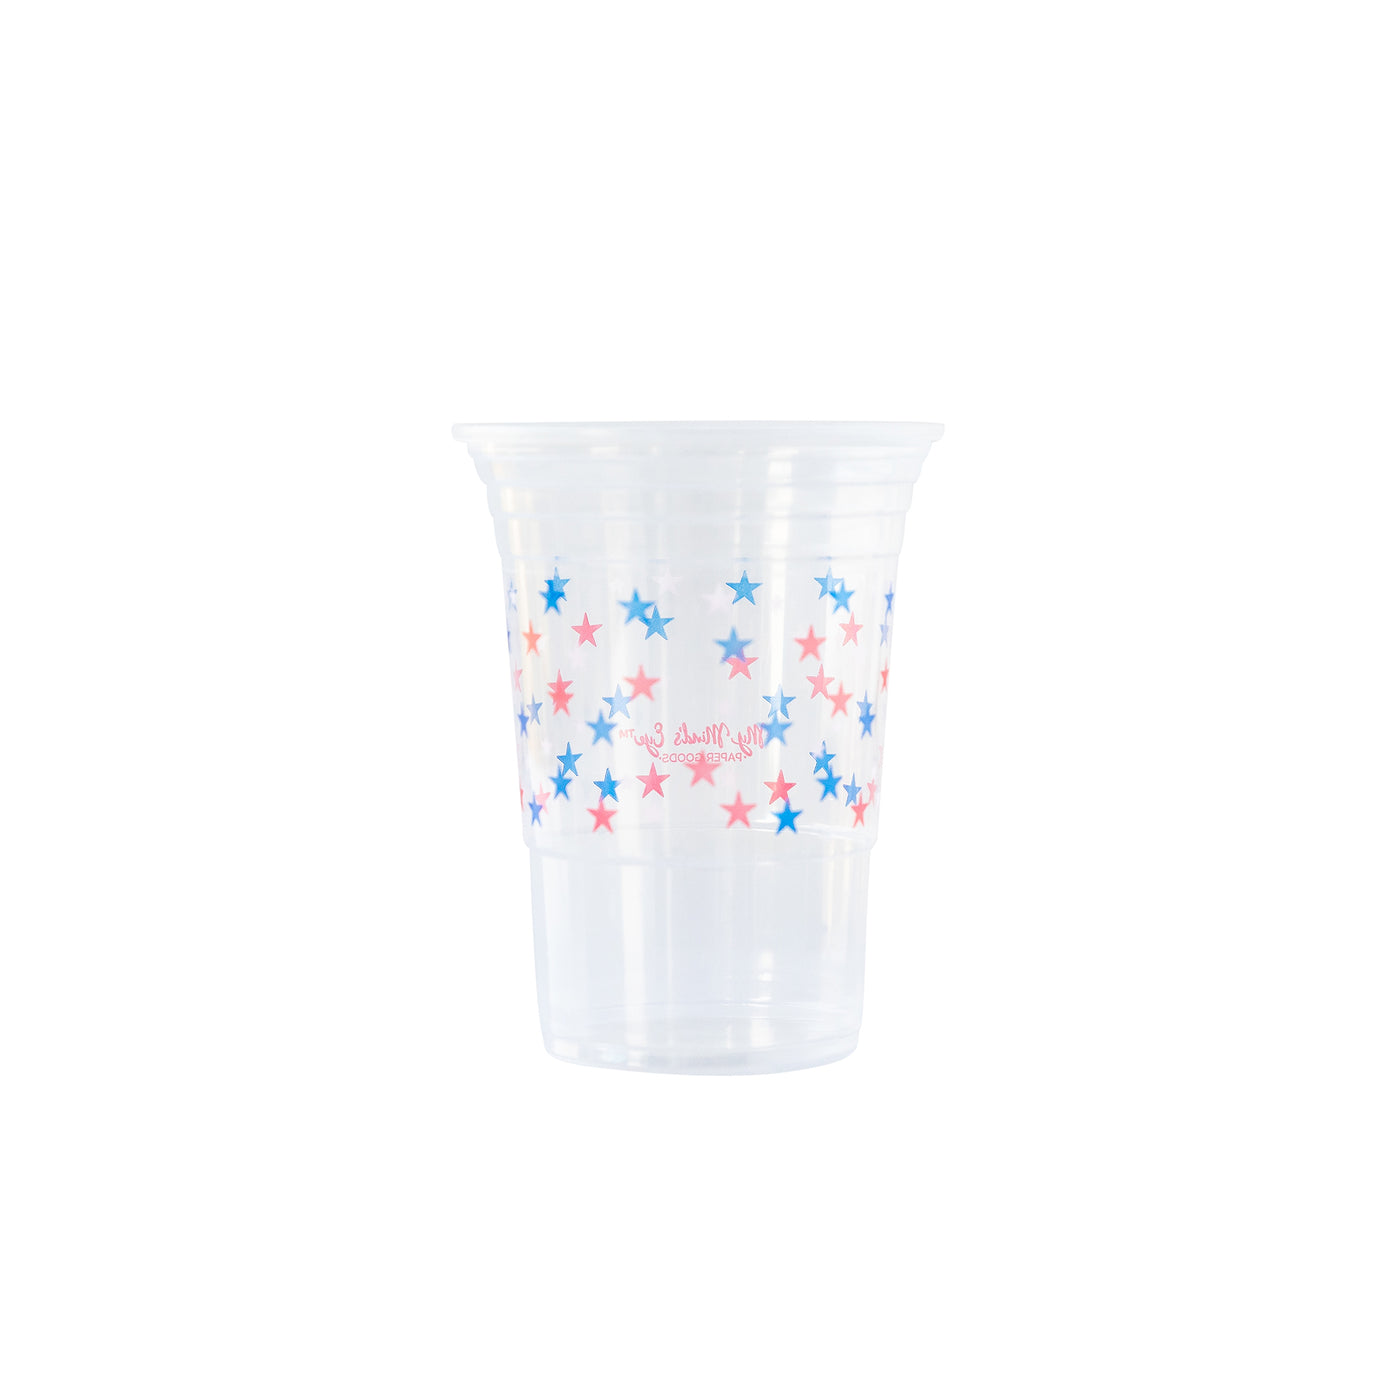 PLTC46 - Lots of Stars Plastic Party Cups